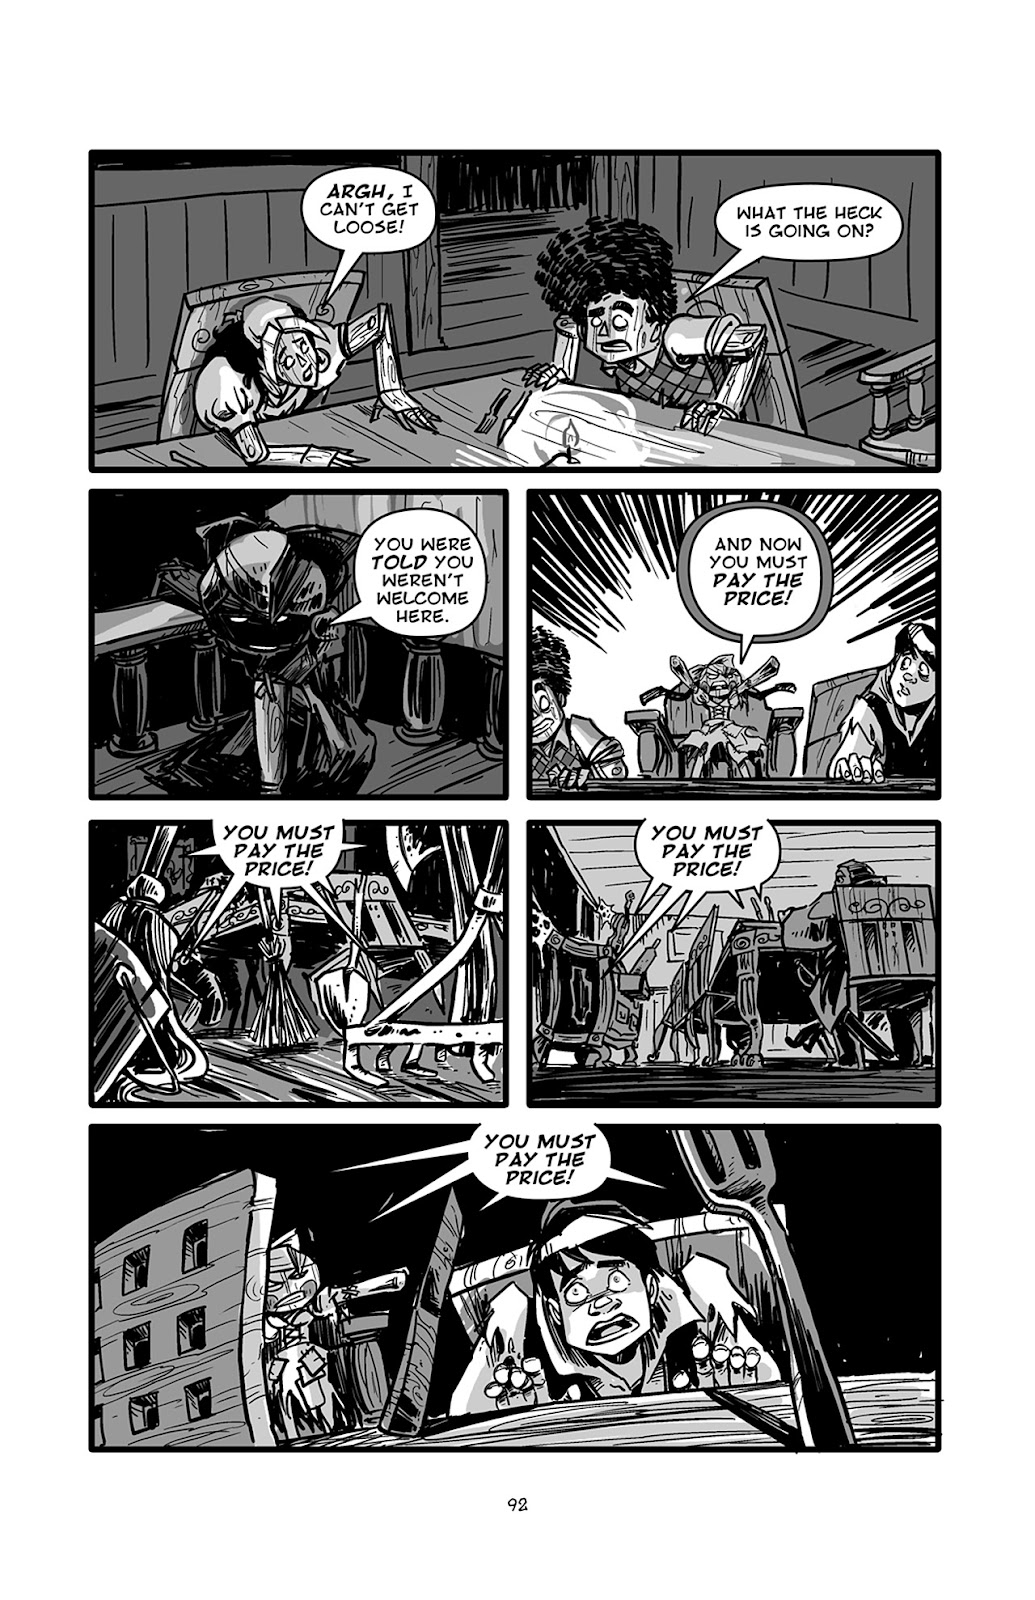 Pinocchio: Vampire Slayer - Of Wood and Blood issue 4 - Page 19